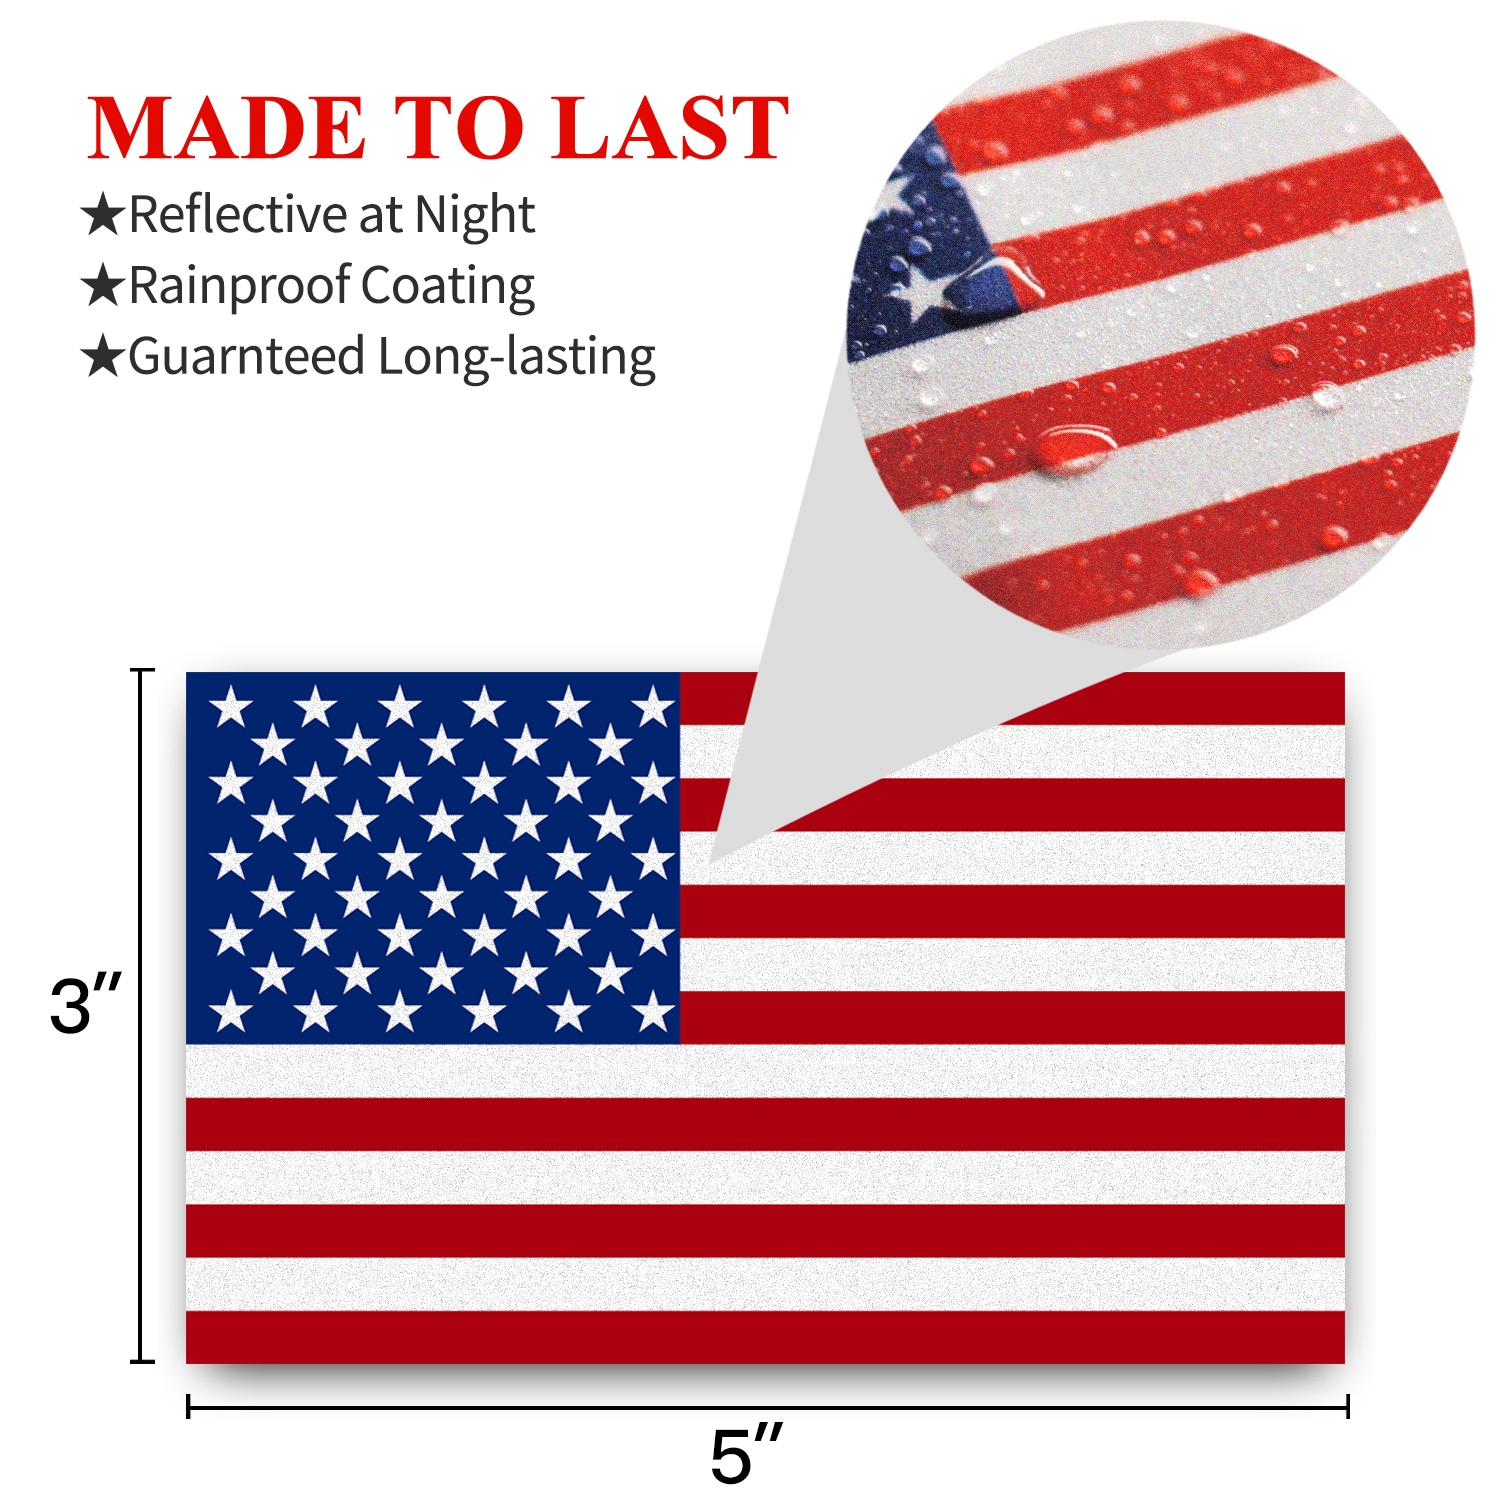 USA decal mirror us Set of 2 Facing L/R 3x5.7 inch American Flag Stickers 